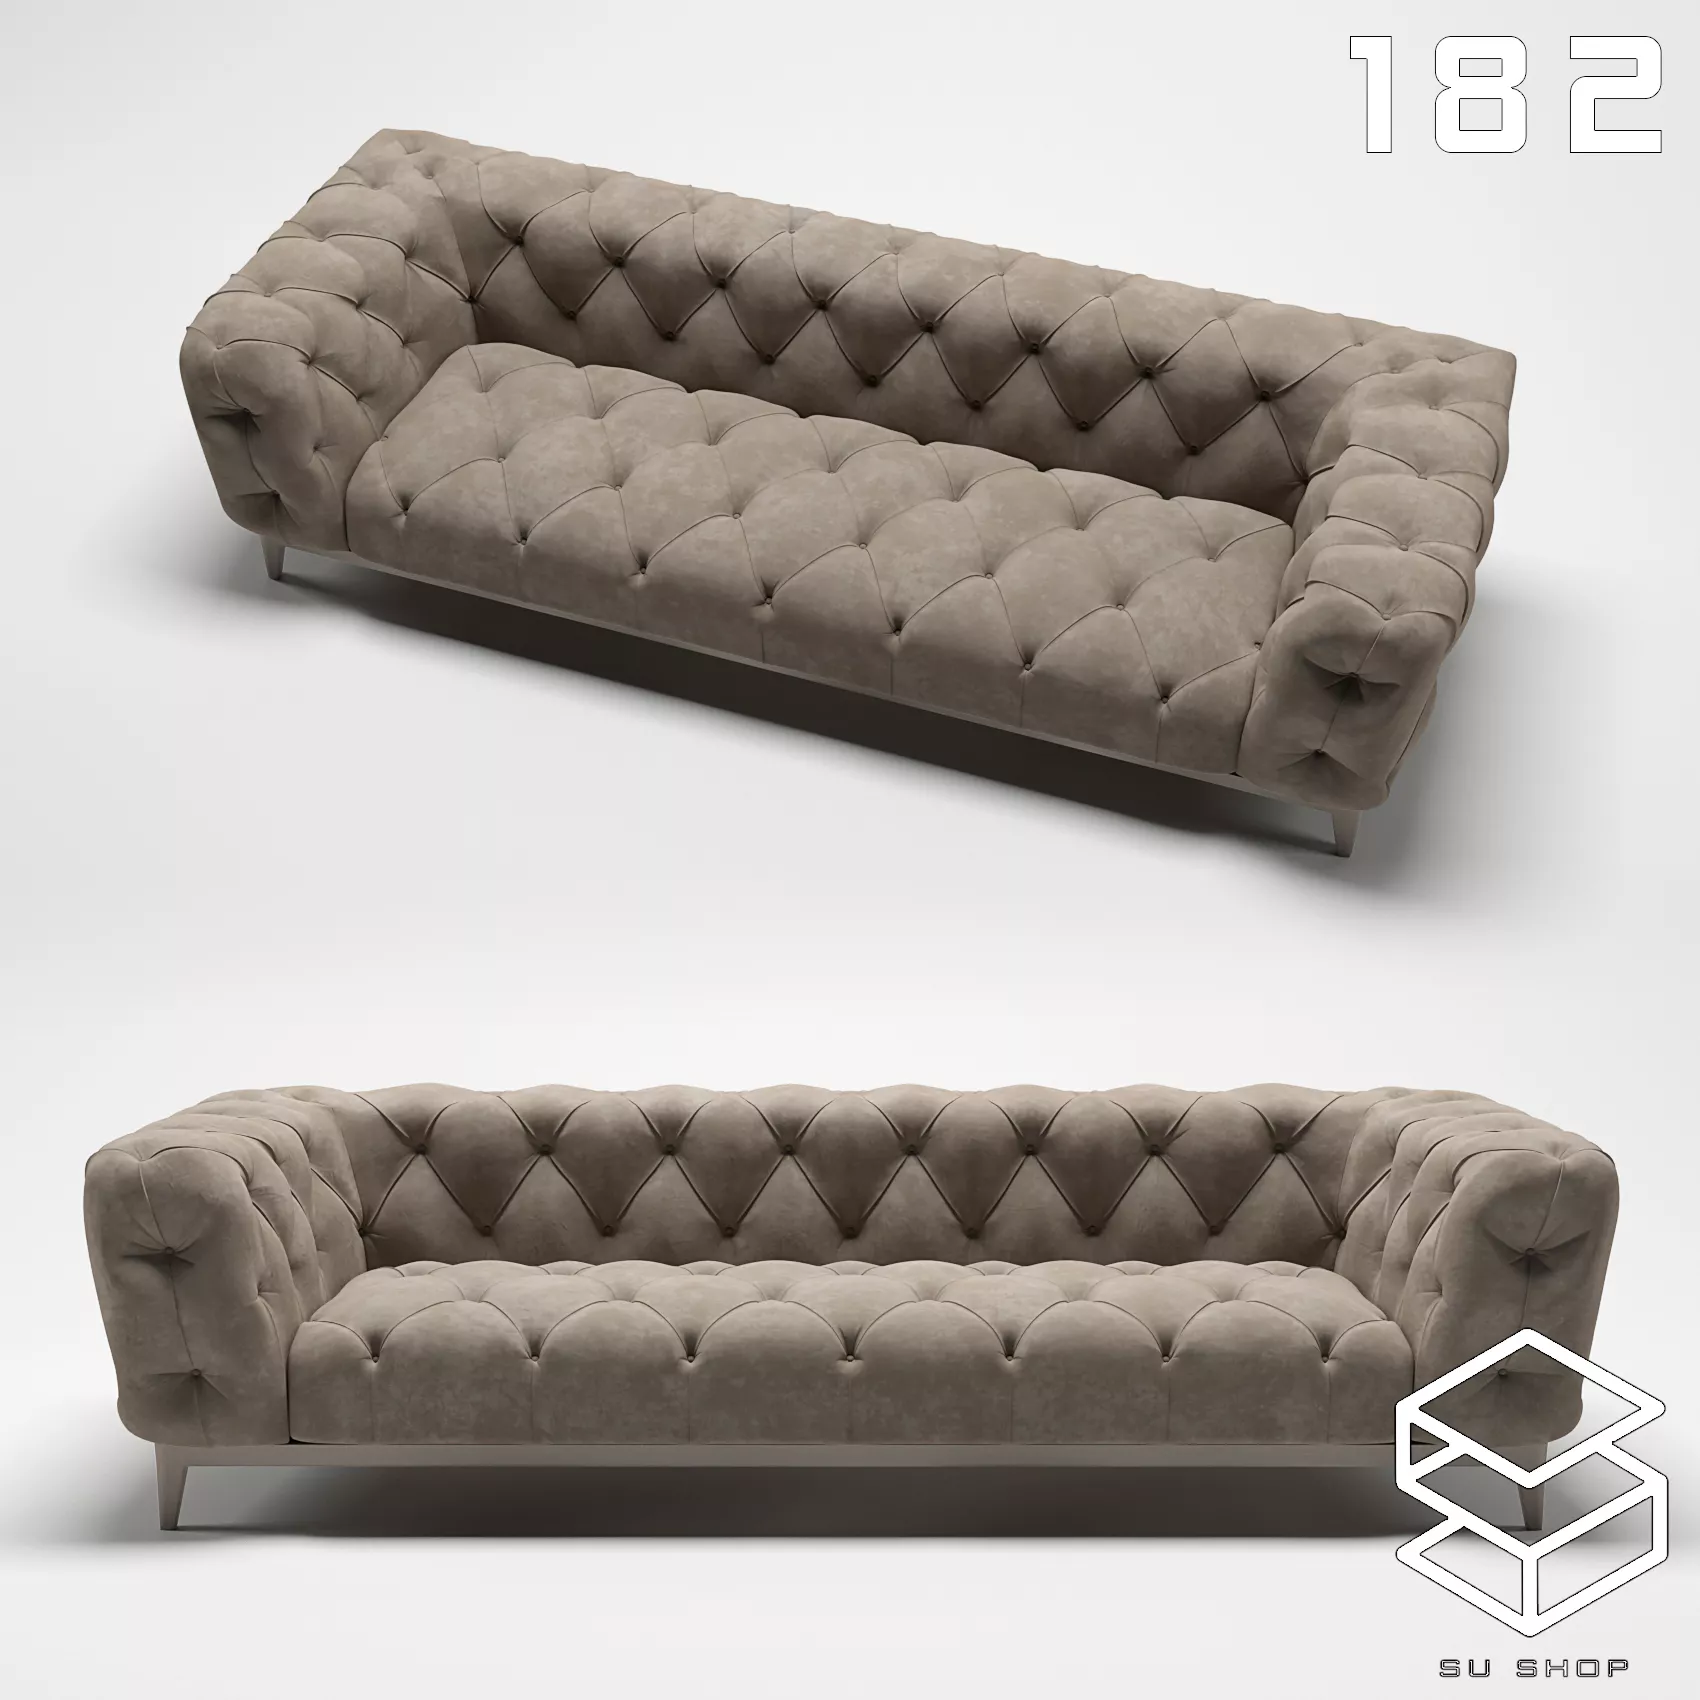 MODERN SOFA - SKETCHUP 3D MODEL - VRAY OR ENSCAPE - ID13477